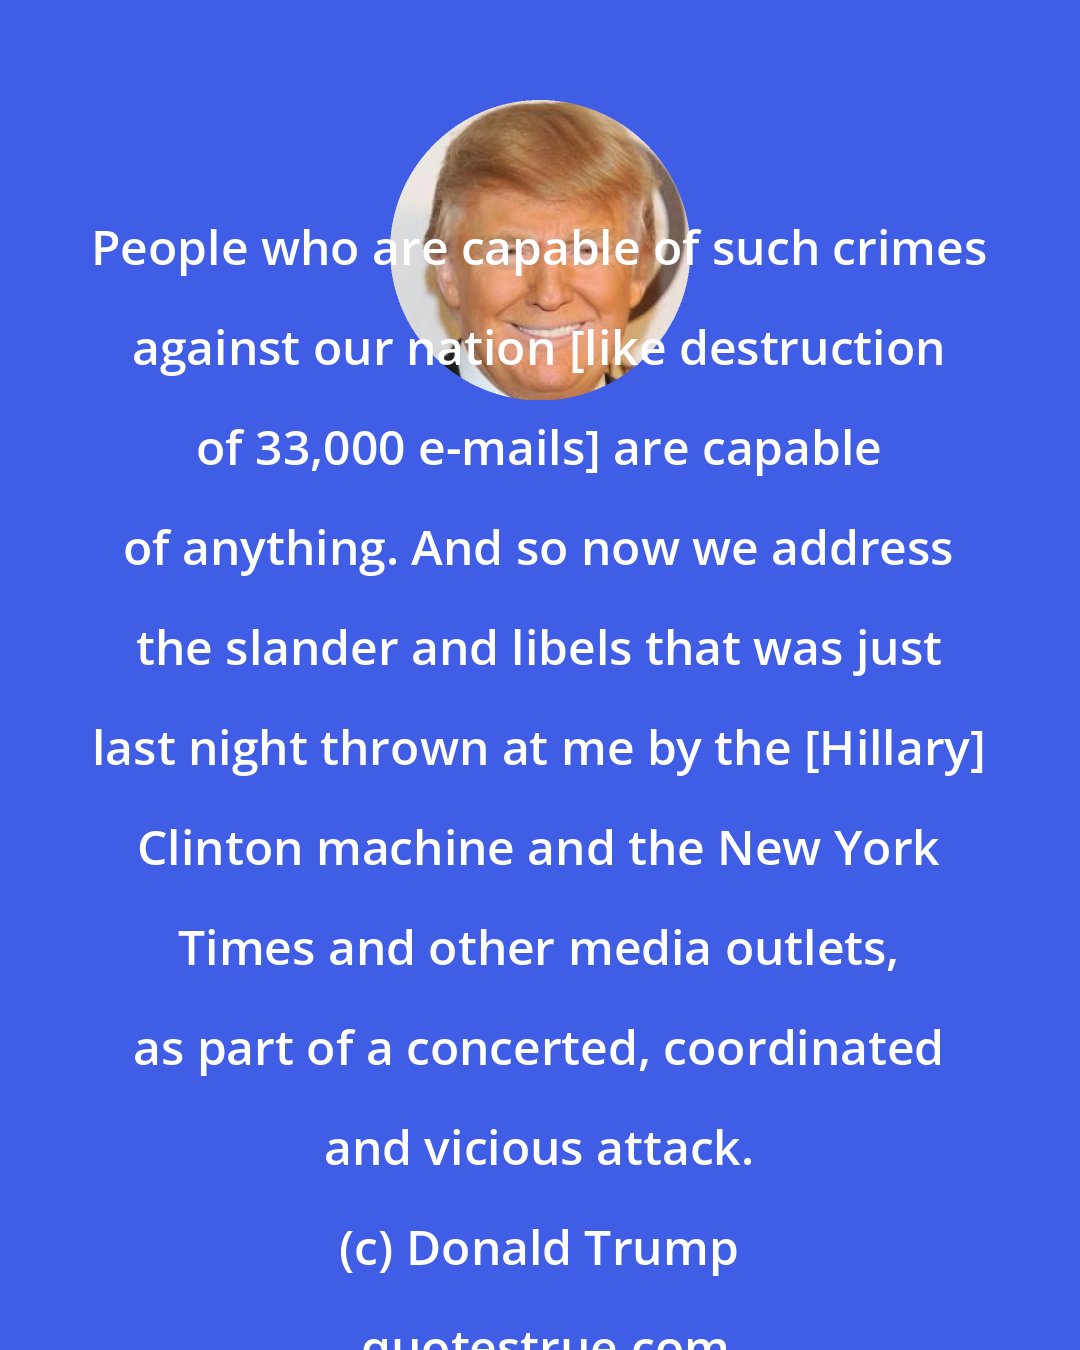 Donald Trump: People who are capable of such crimes against our nation [like destruction of 33,000 e-mails] are capable of anything. And so now we address the slander and libels that was just last night thrown at me by the [Hillary] Clinton machine and the New York Times and other media outlets, as part of a concerted, coordinated and vicious attack.